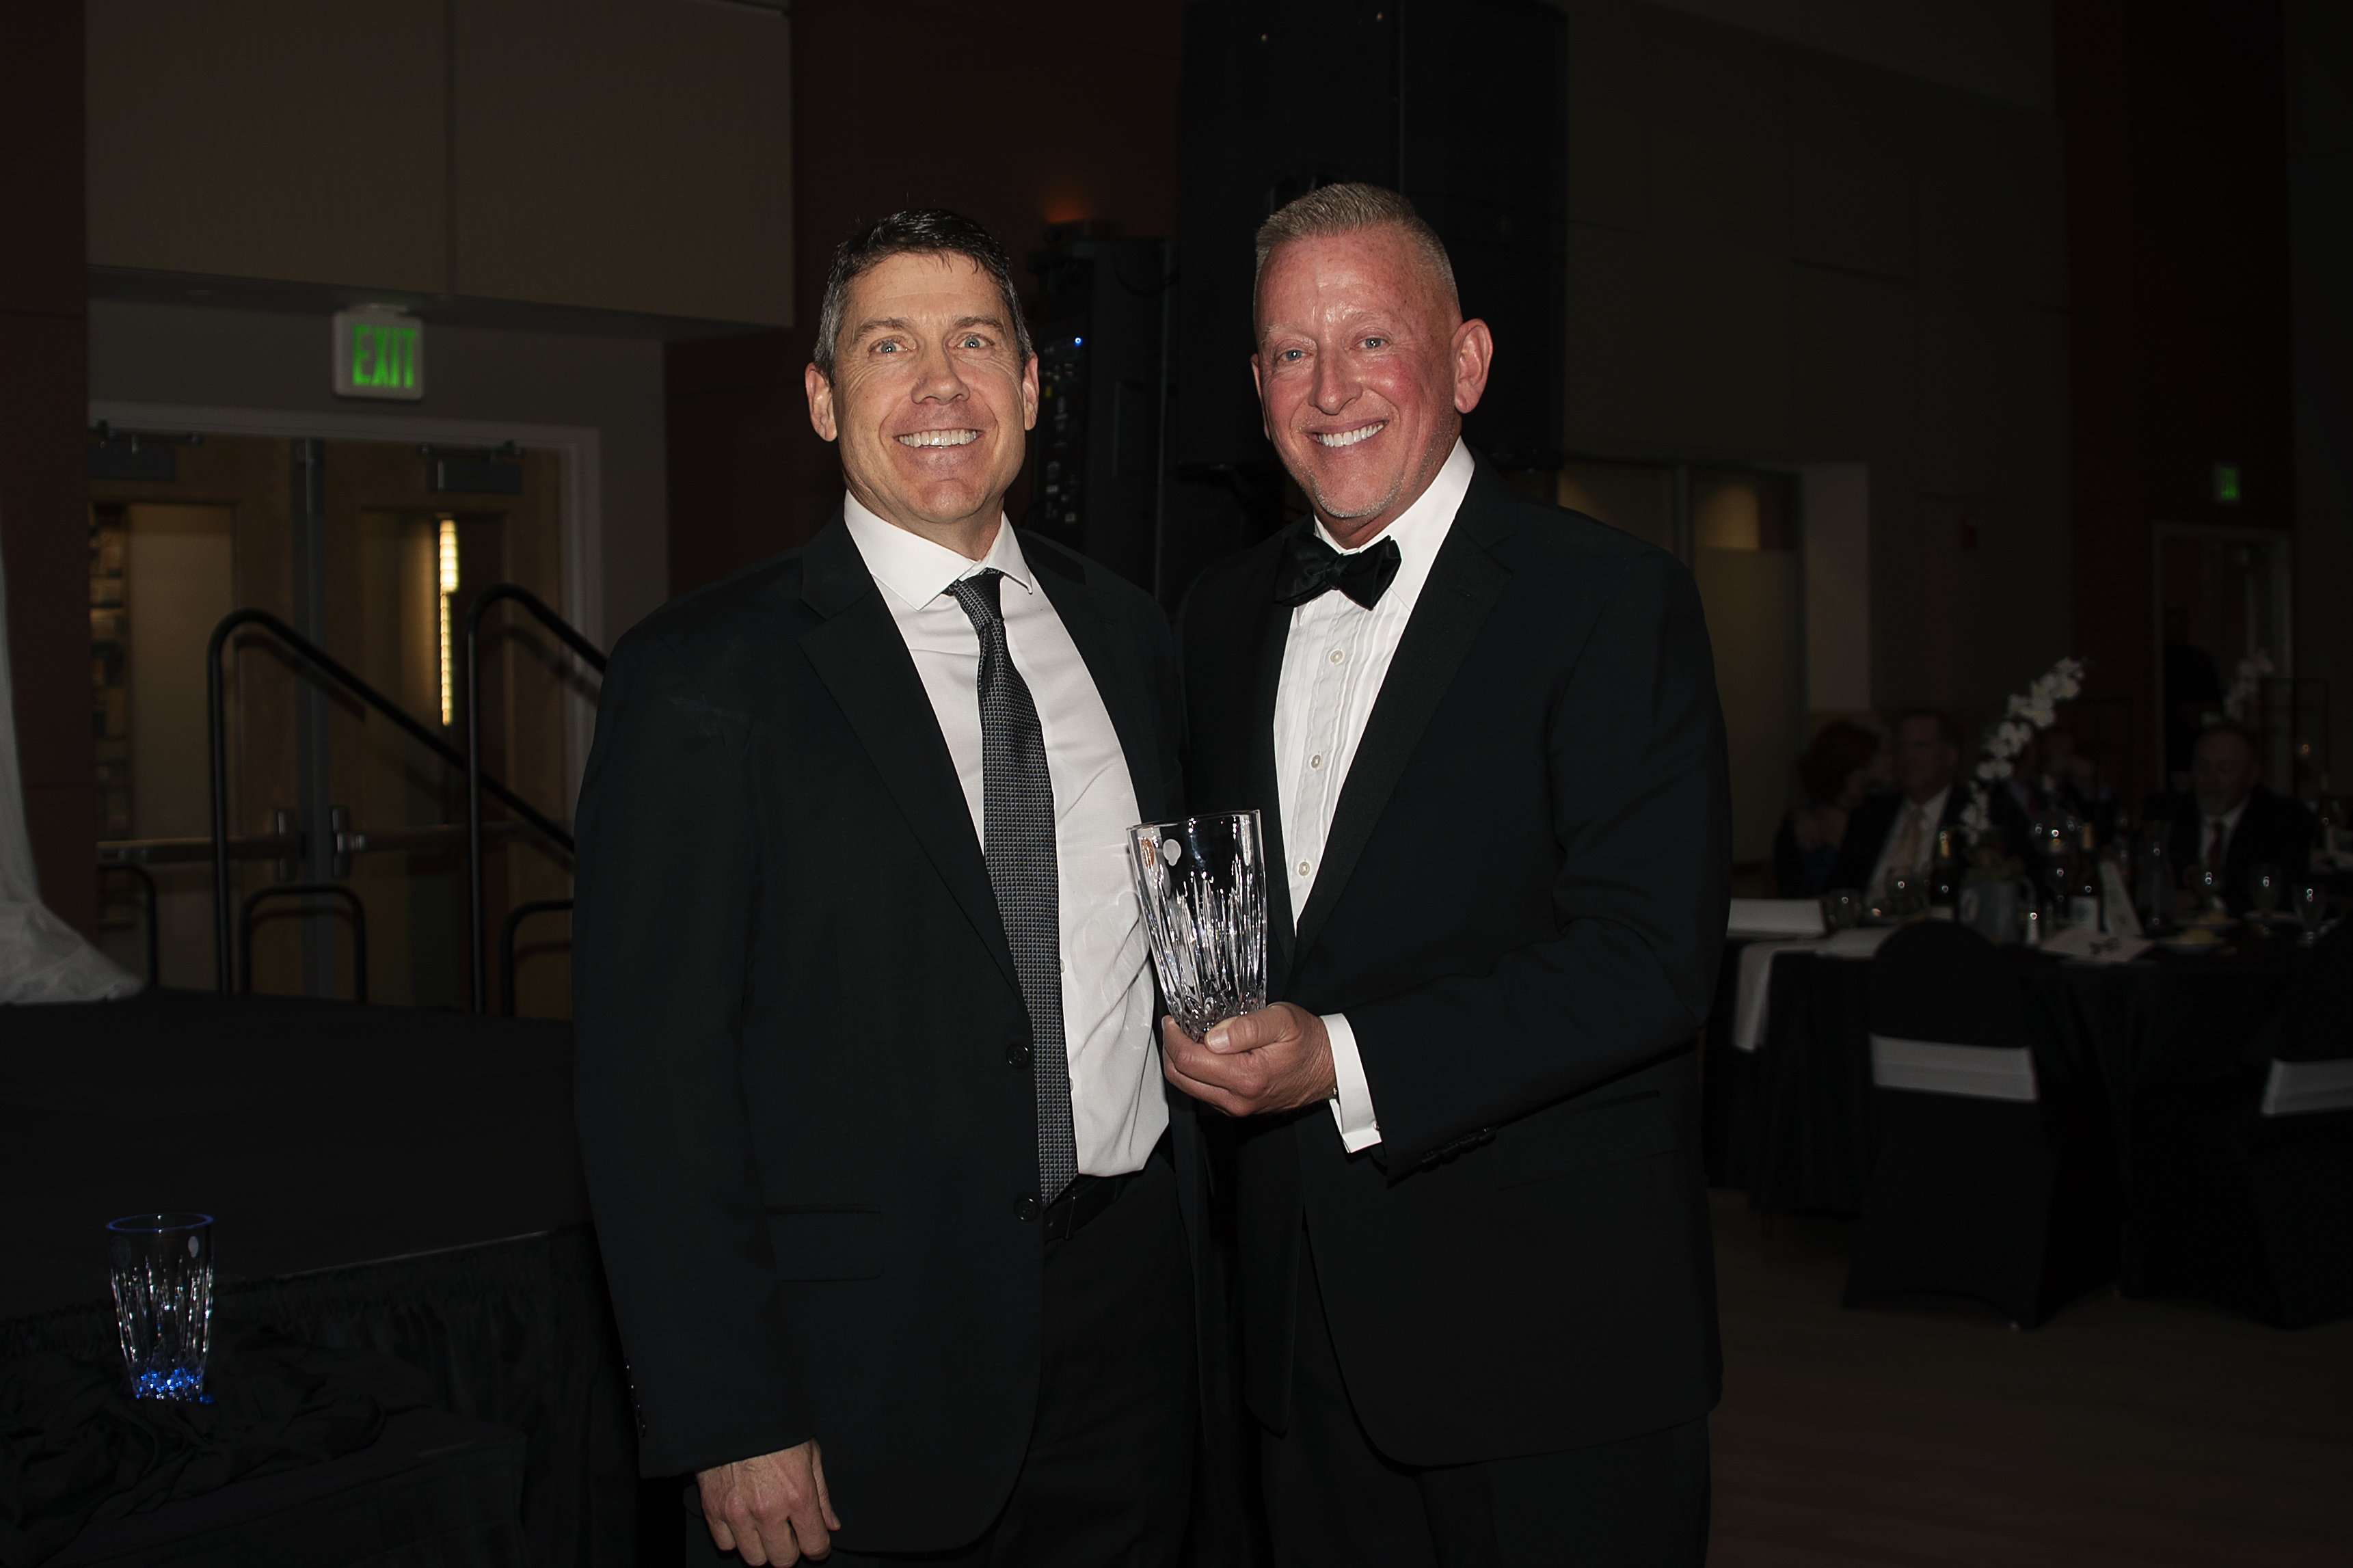 Vance Crocker accepts Black Hills Energy's Award for Distinguished Service to the Community